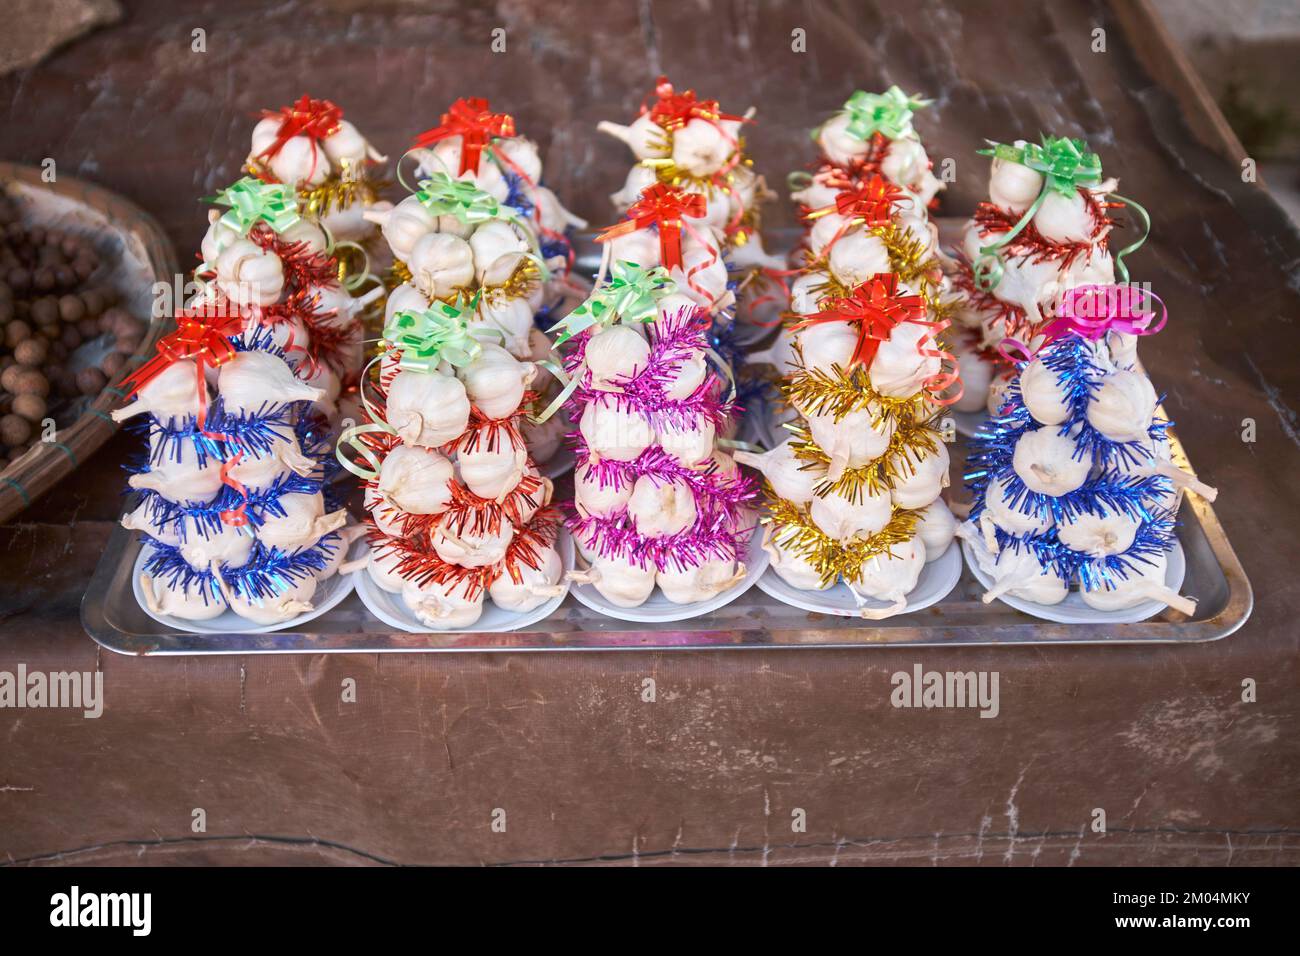 Garlic christmas trees on sale at the morning food market in Hoi An Vietnam Stock Photo